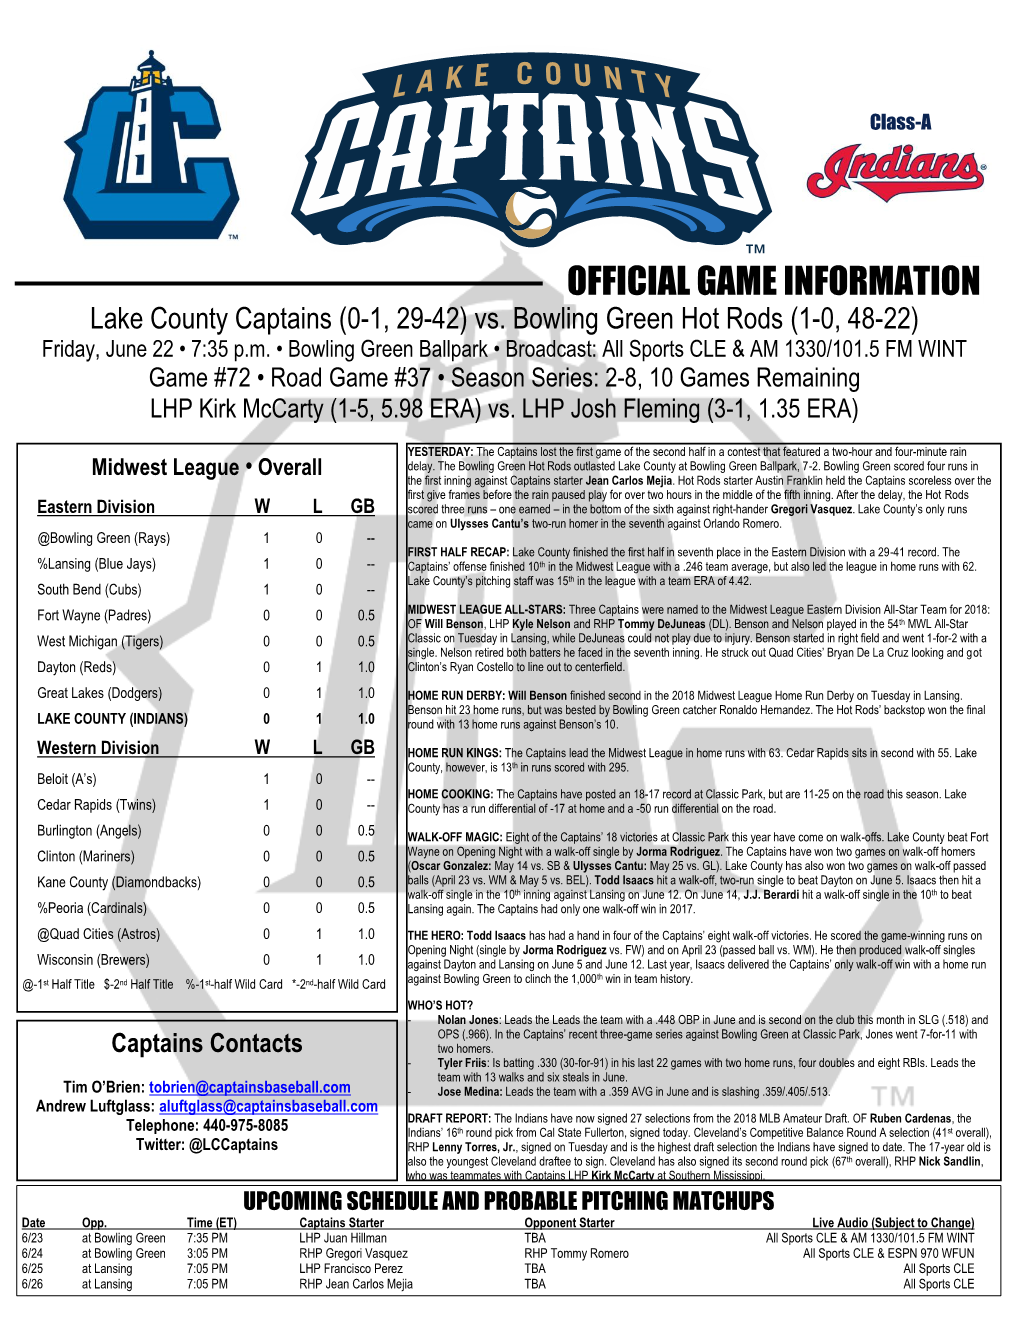 OFFICIAL GAME INFORMATION Lake County Captains (0-1, 29-42) Vs